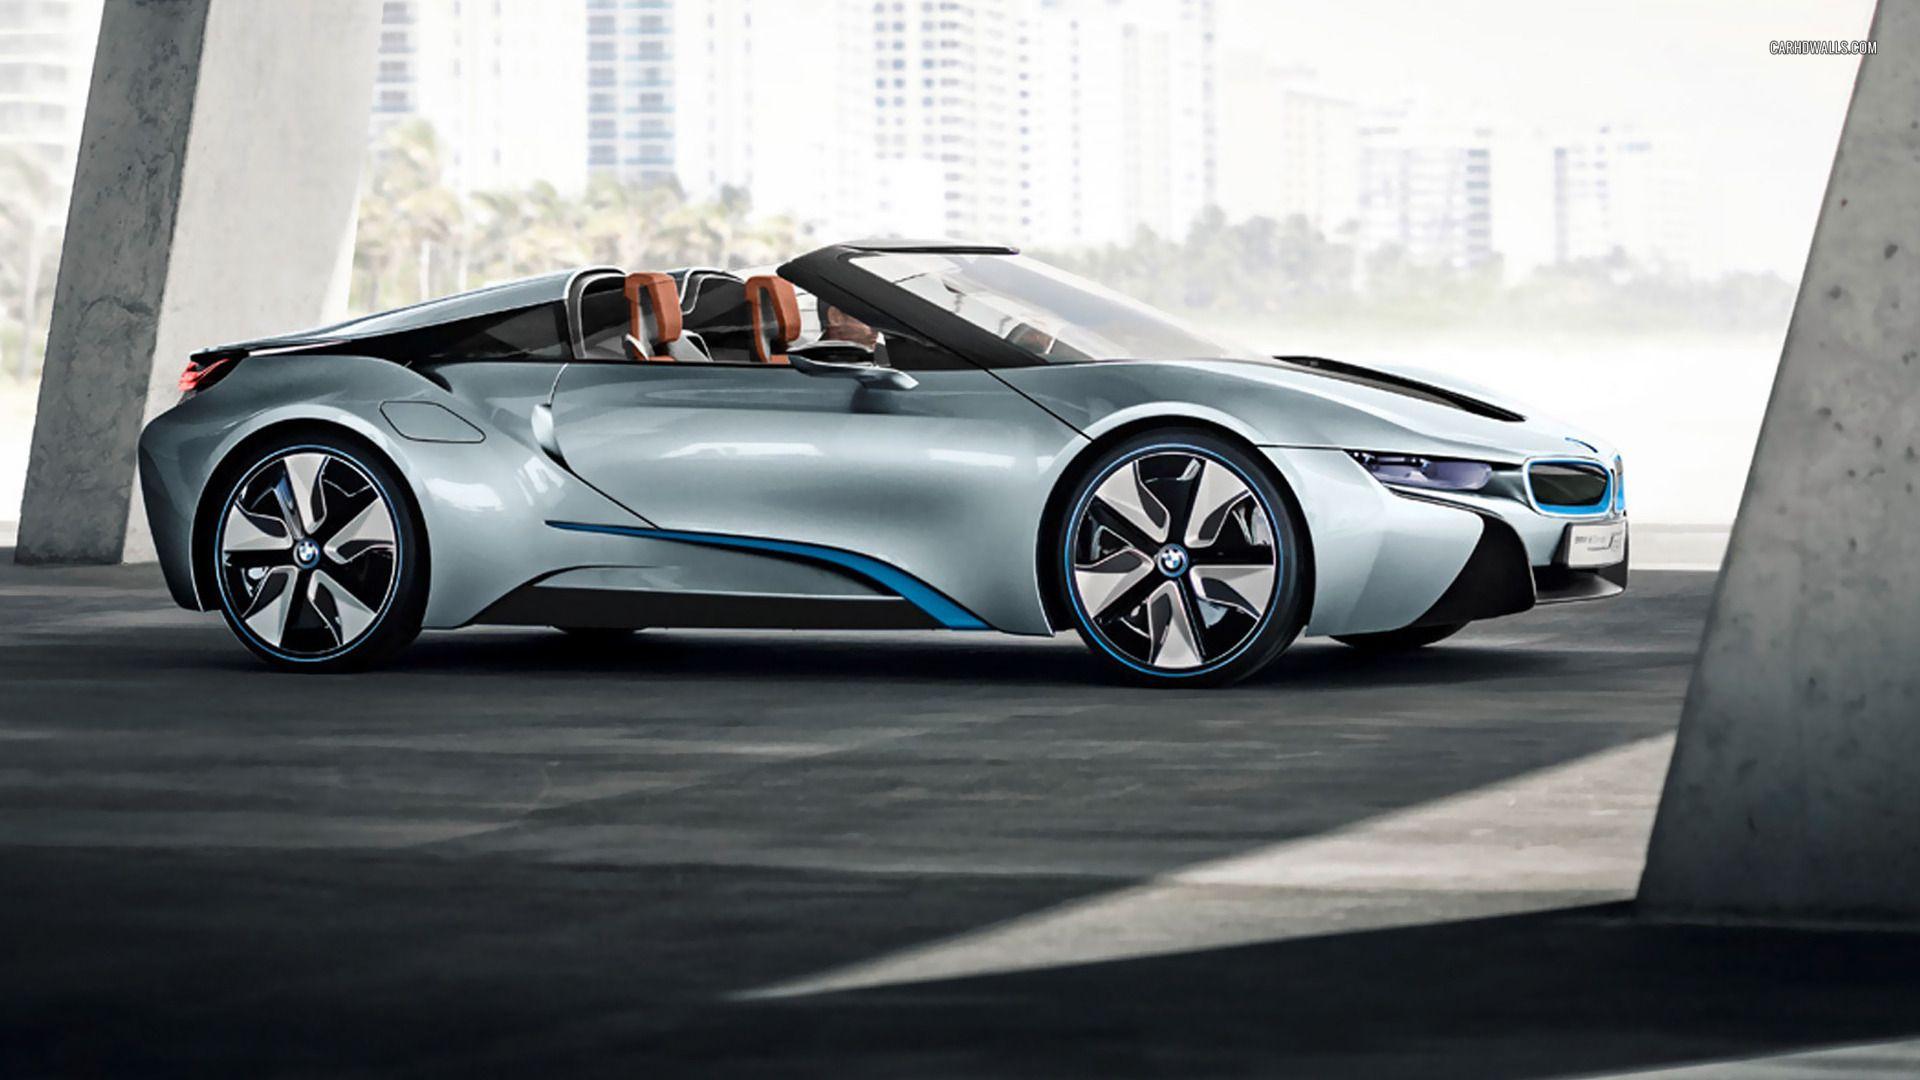 Bmw I8 Spyder, reviews, msrp, ratings with amazing image